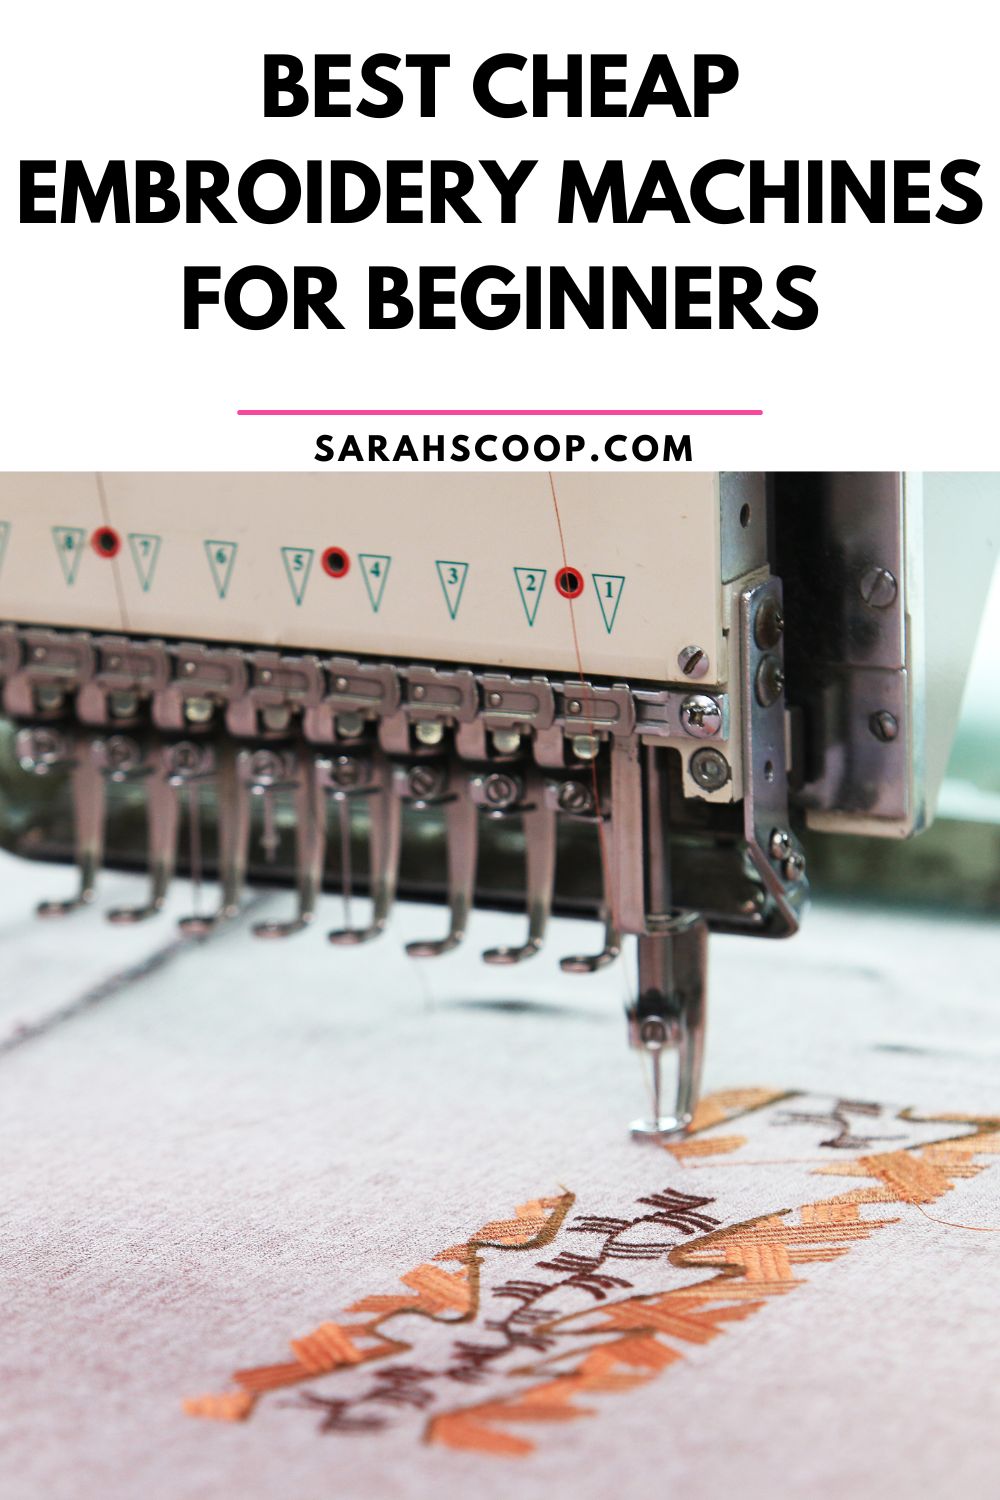 15 Best Cheap Embroidery Machines for Beginners